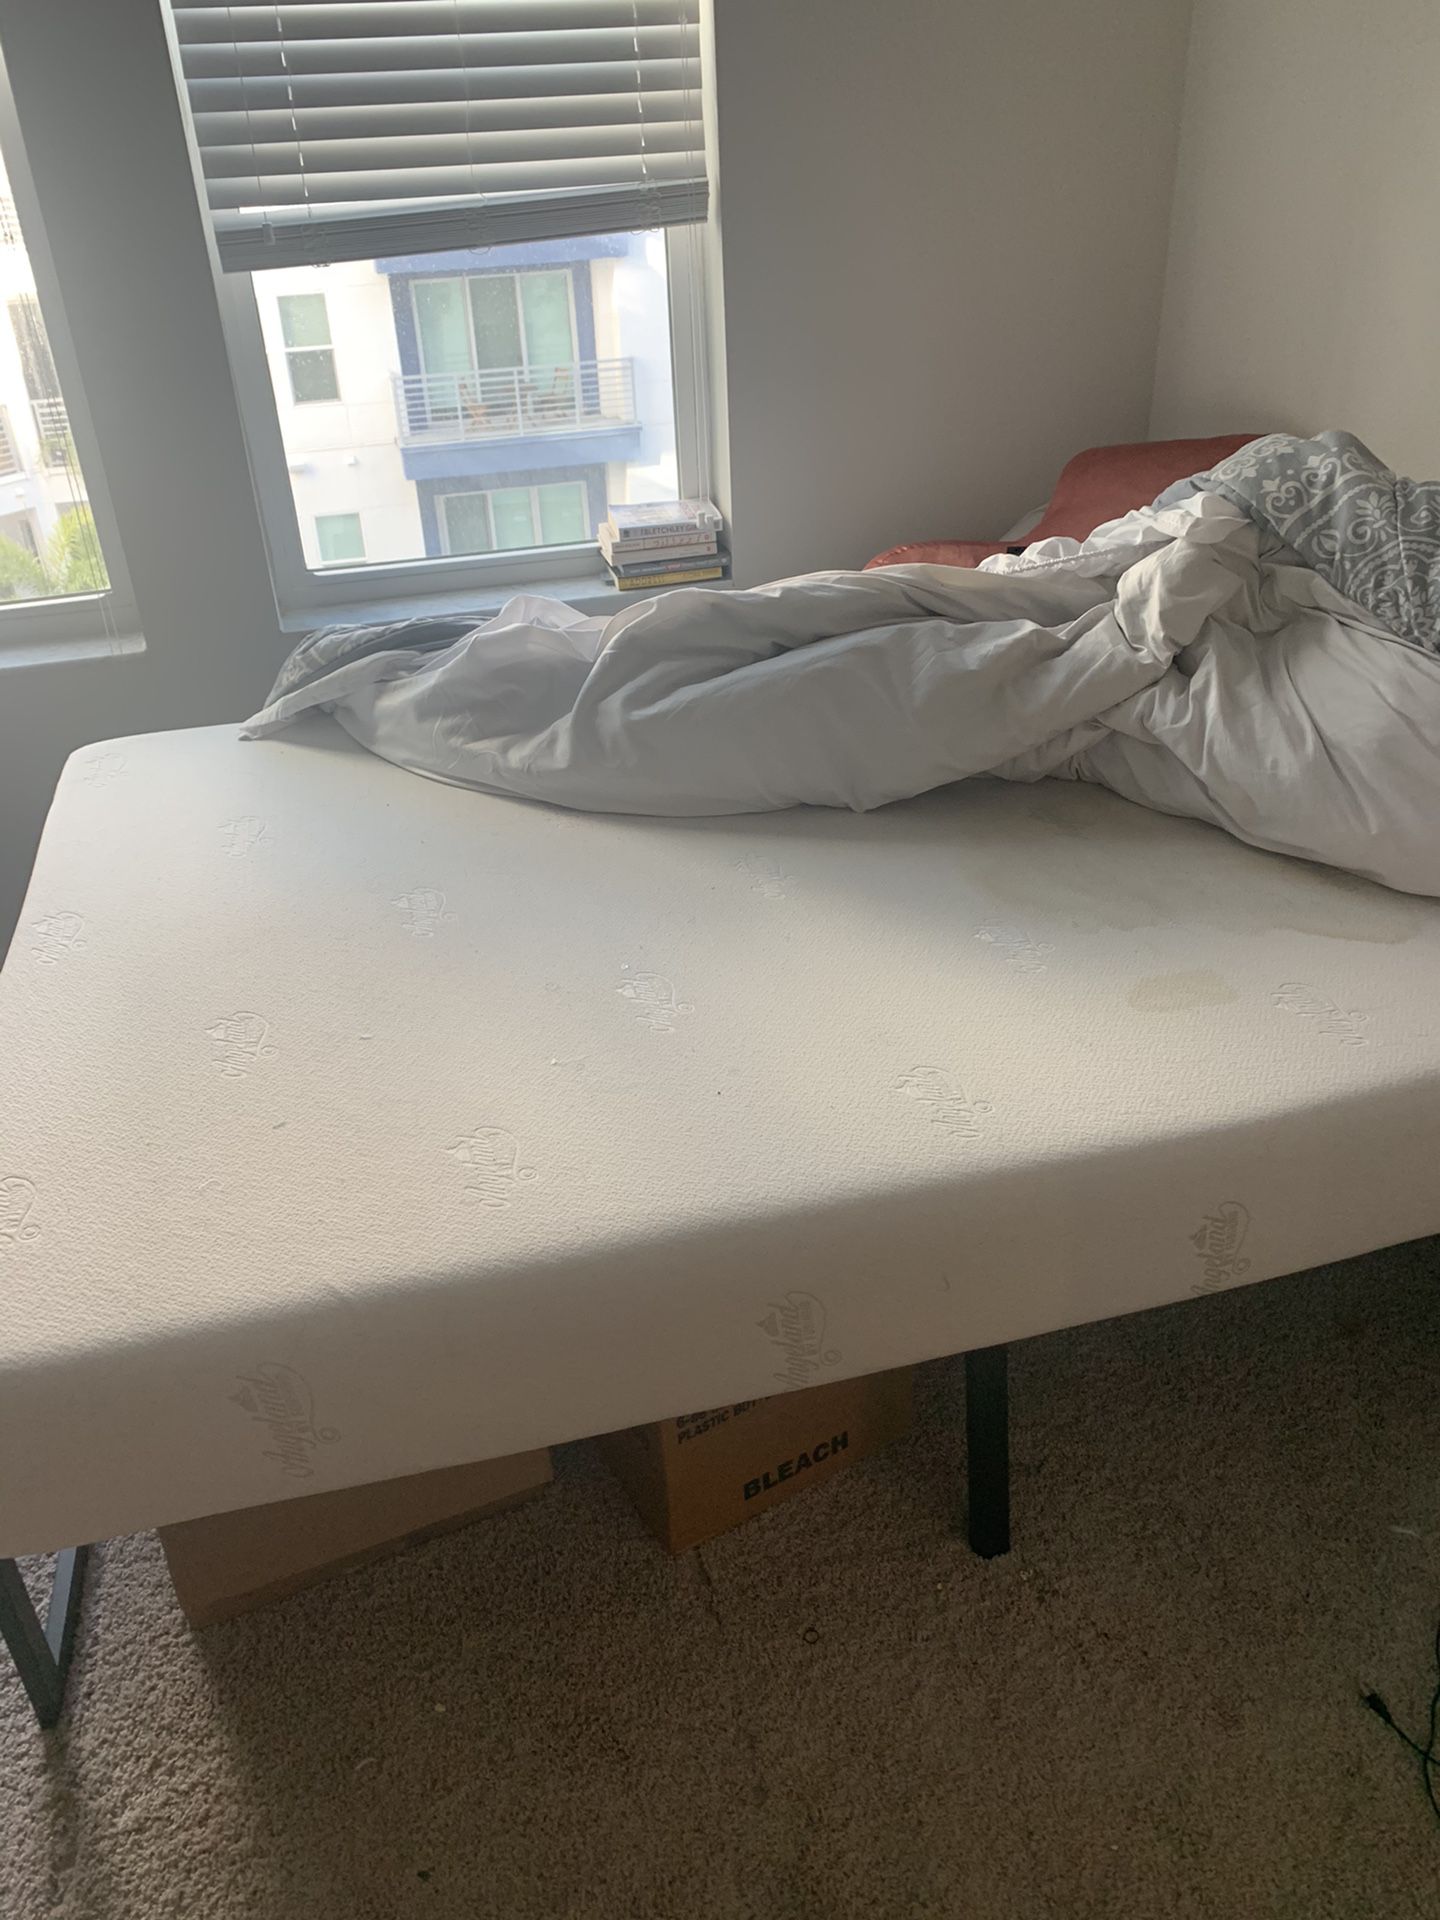 Queen size mattress and bed frame